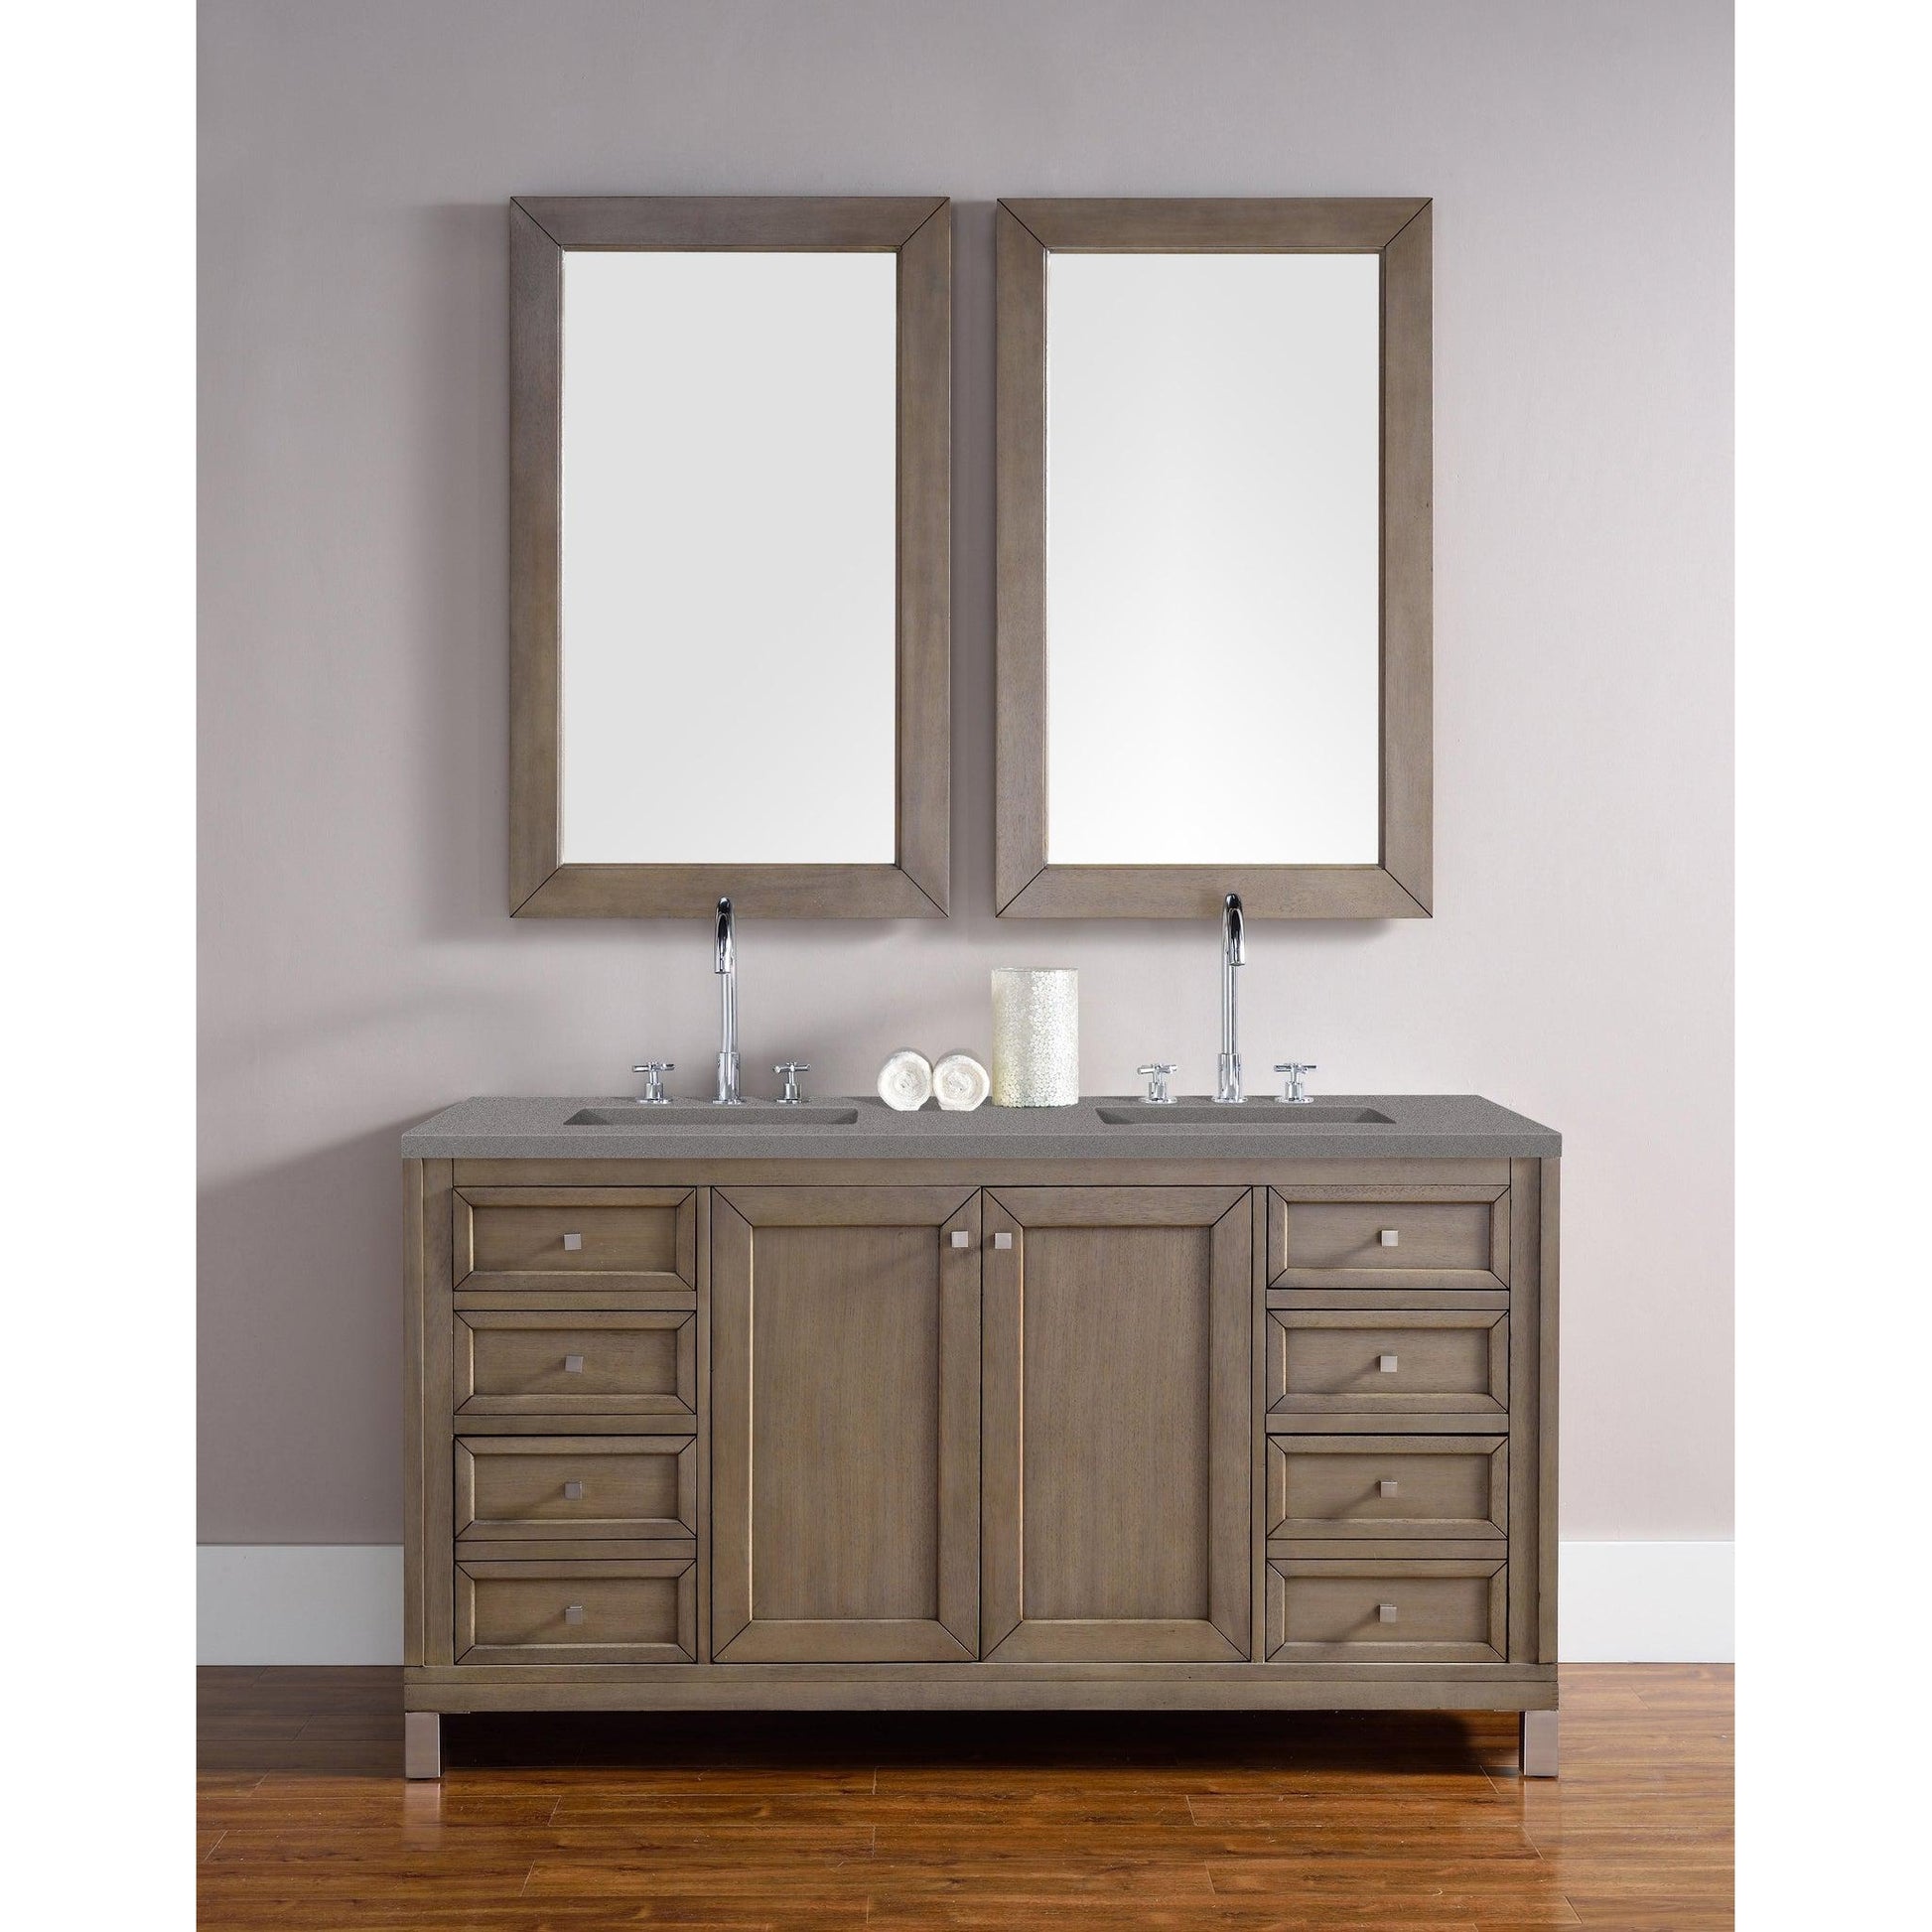 James Martin Chicago 60" Double Whitewashed Walnut Bathroom Vanity With 1" Gray Expo Quartz Top and Rectangular Ceramic Sink